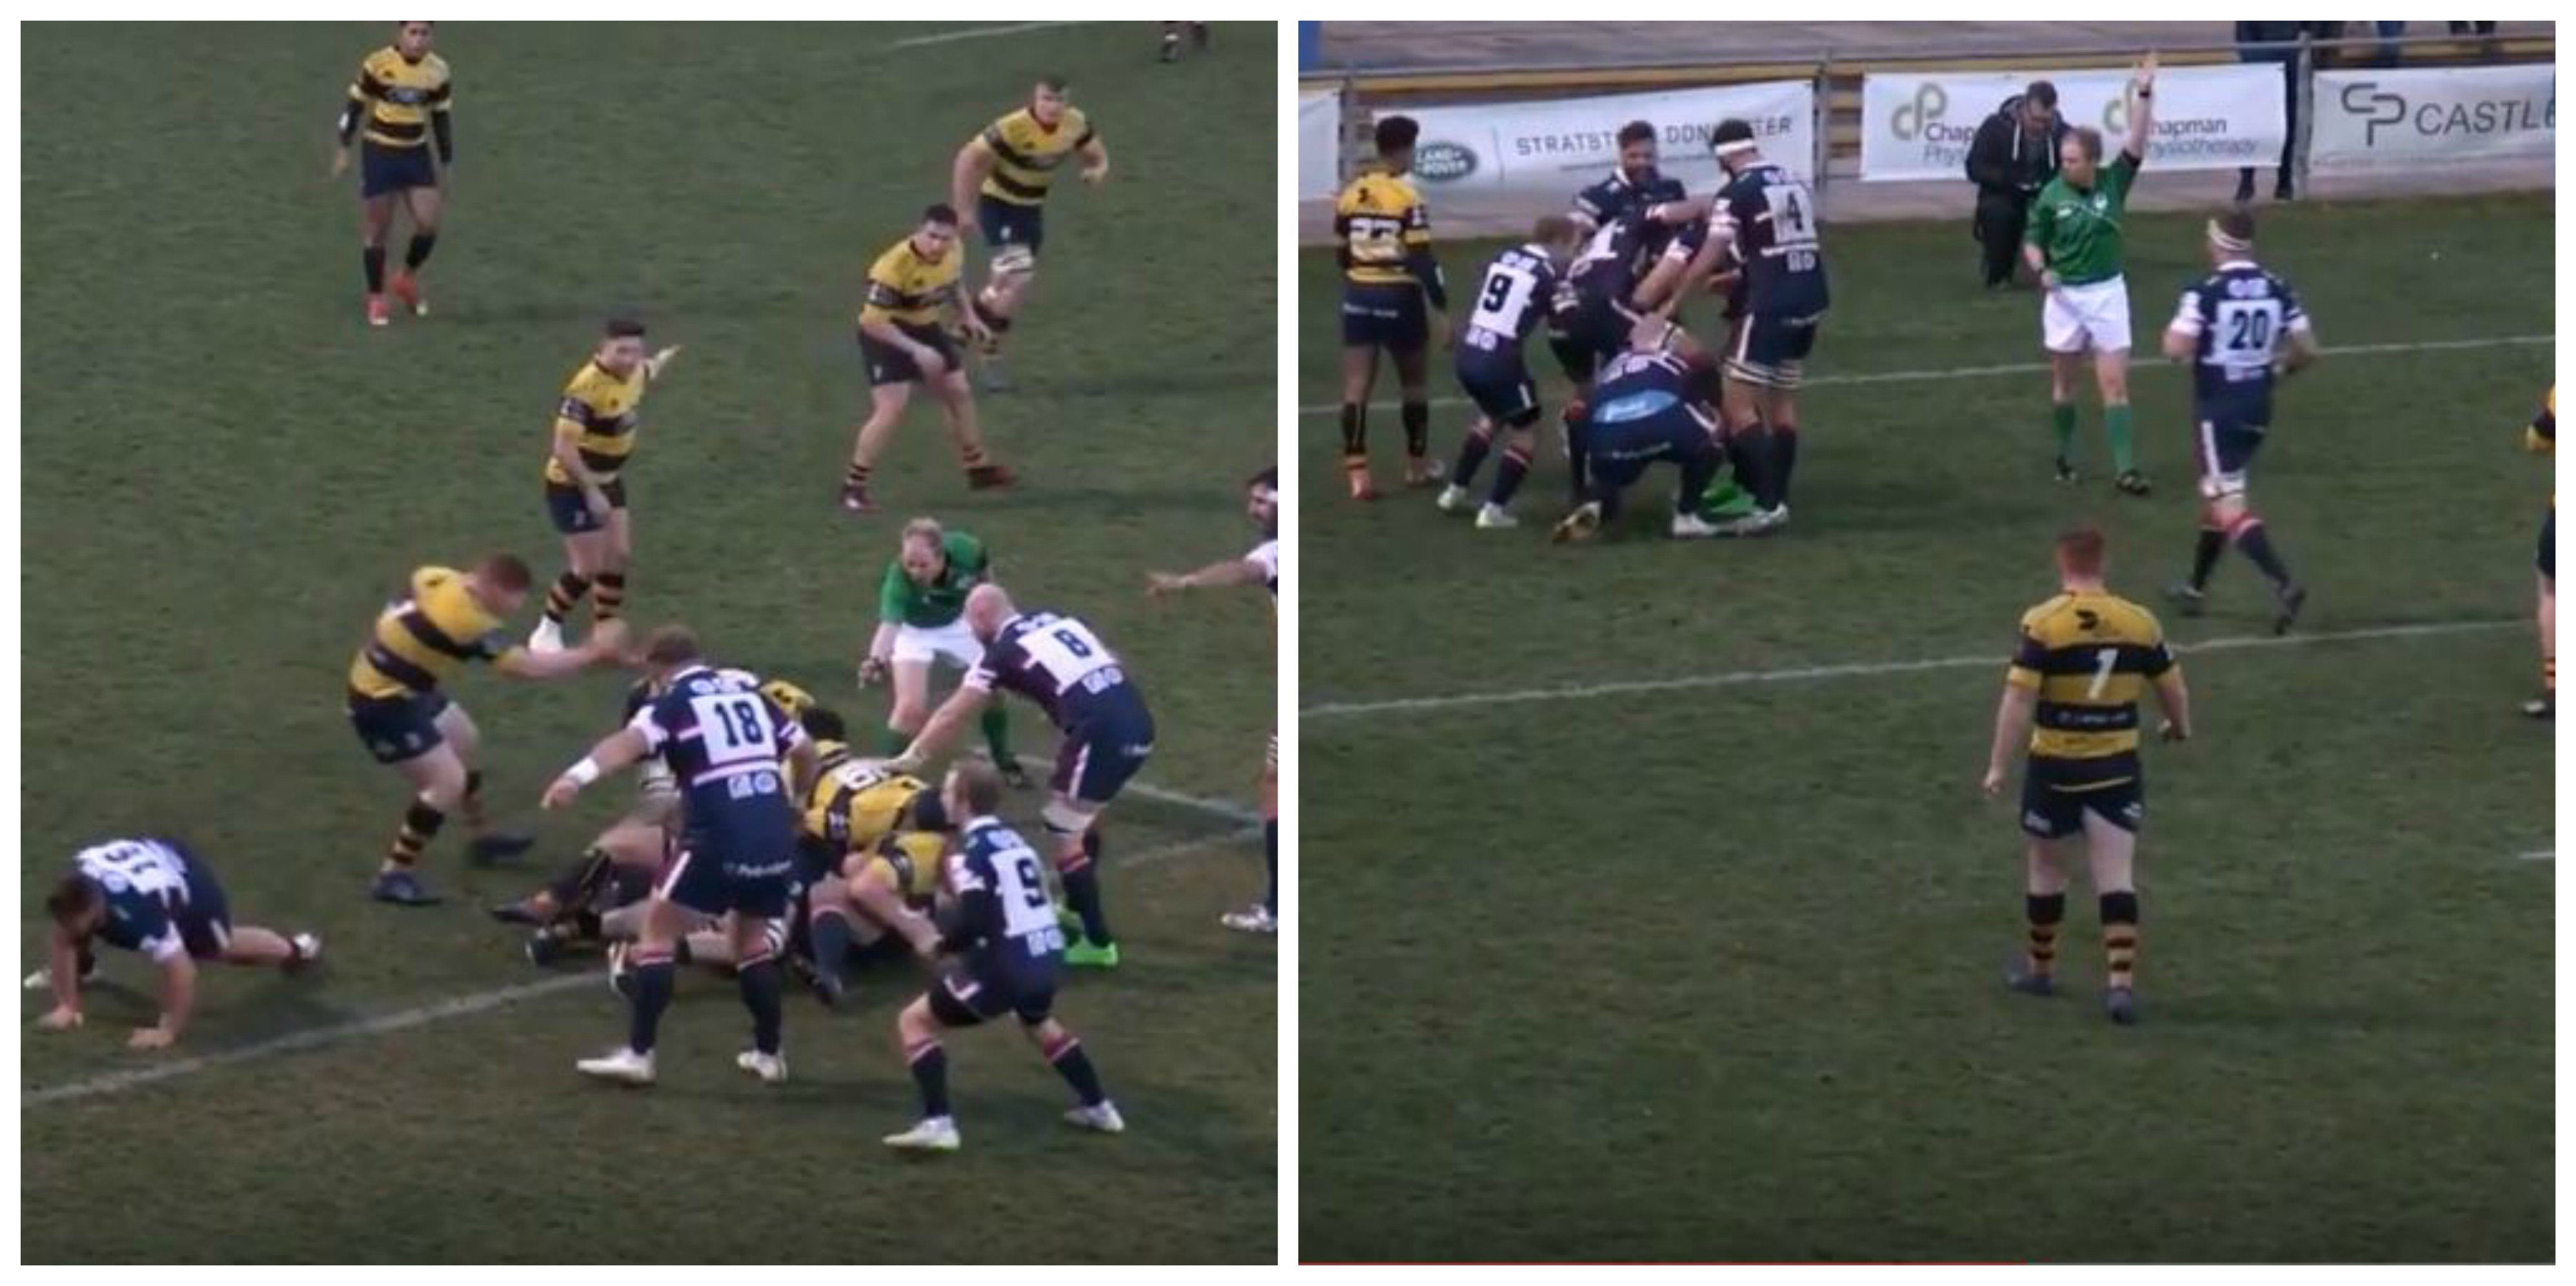 FOOTAGE: 22.5 stone prop's hideous bit of filth will embitter backs everywhere